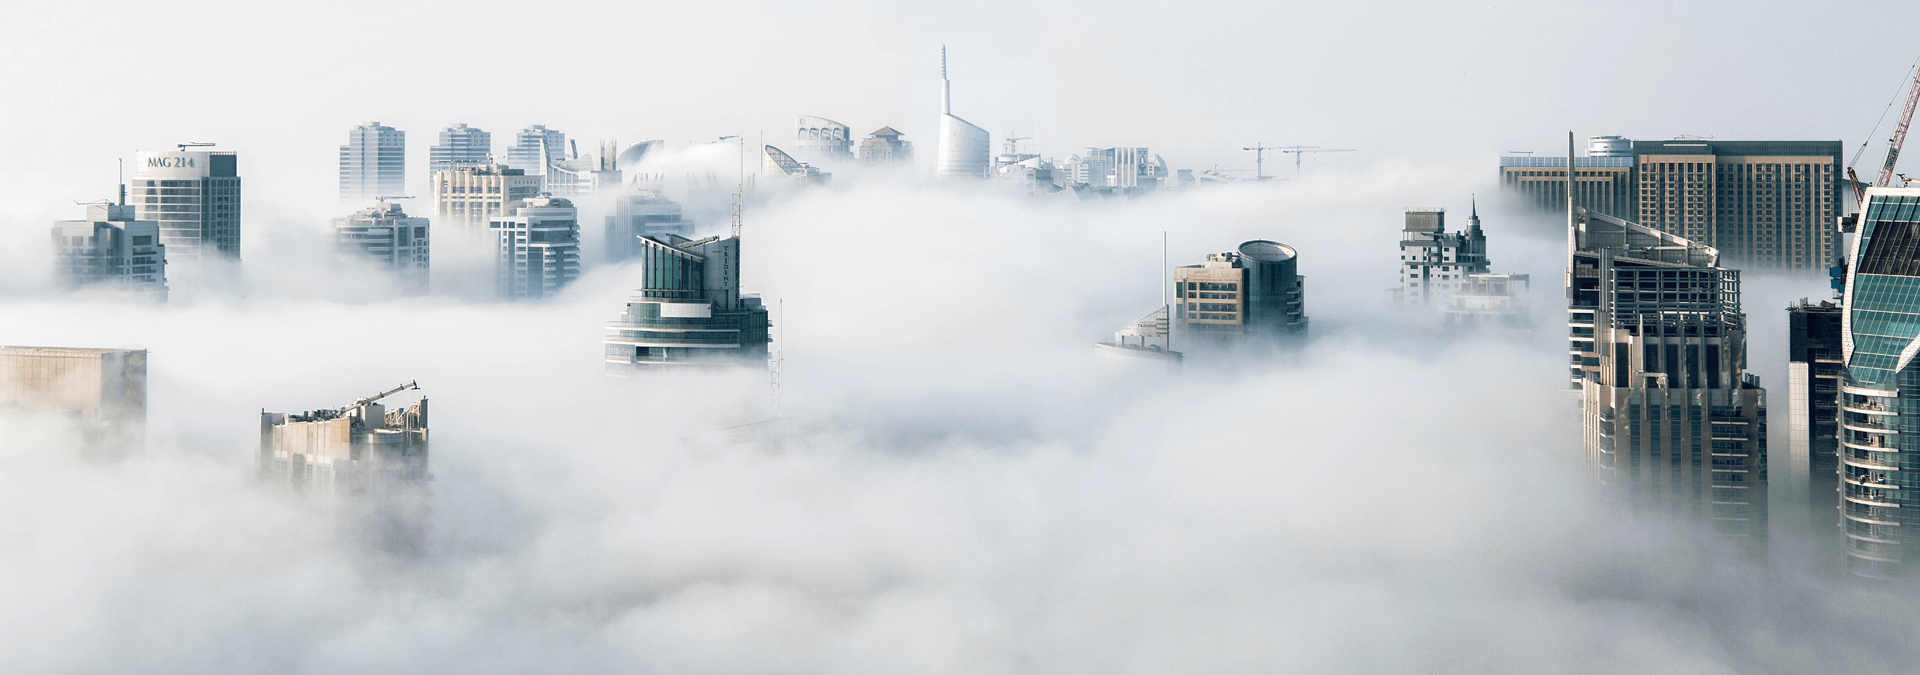 The tallest buildings of a cityscape peeking above a bed of low-hanging clouds